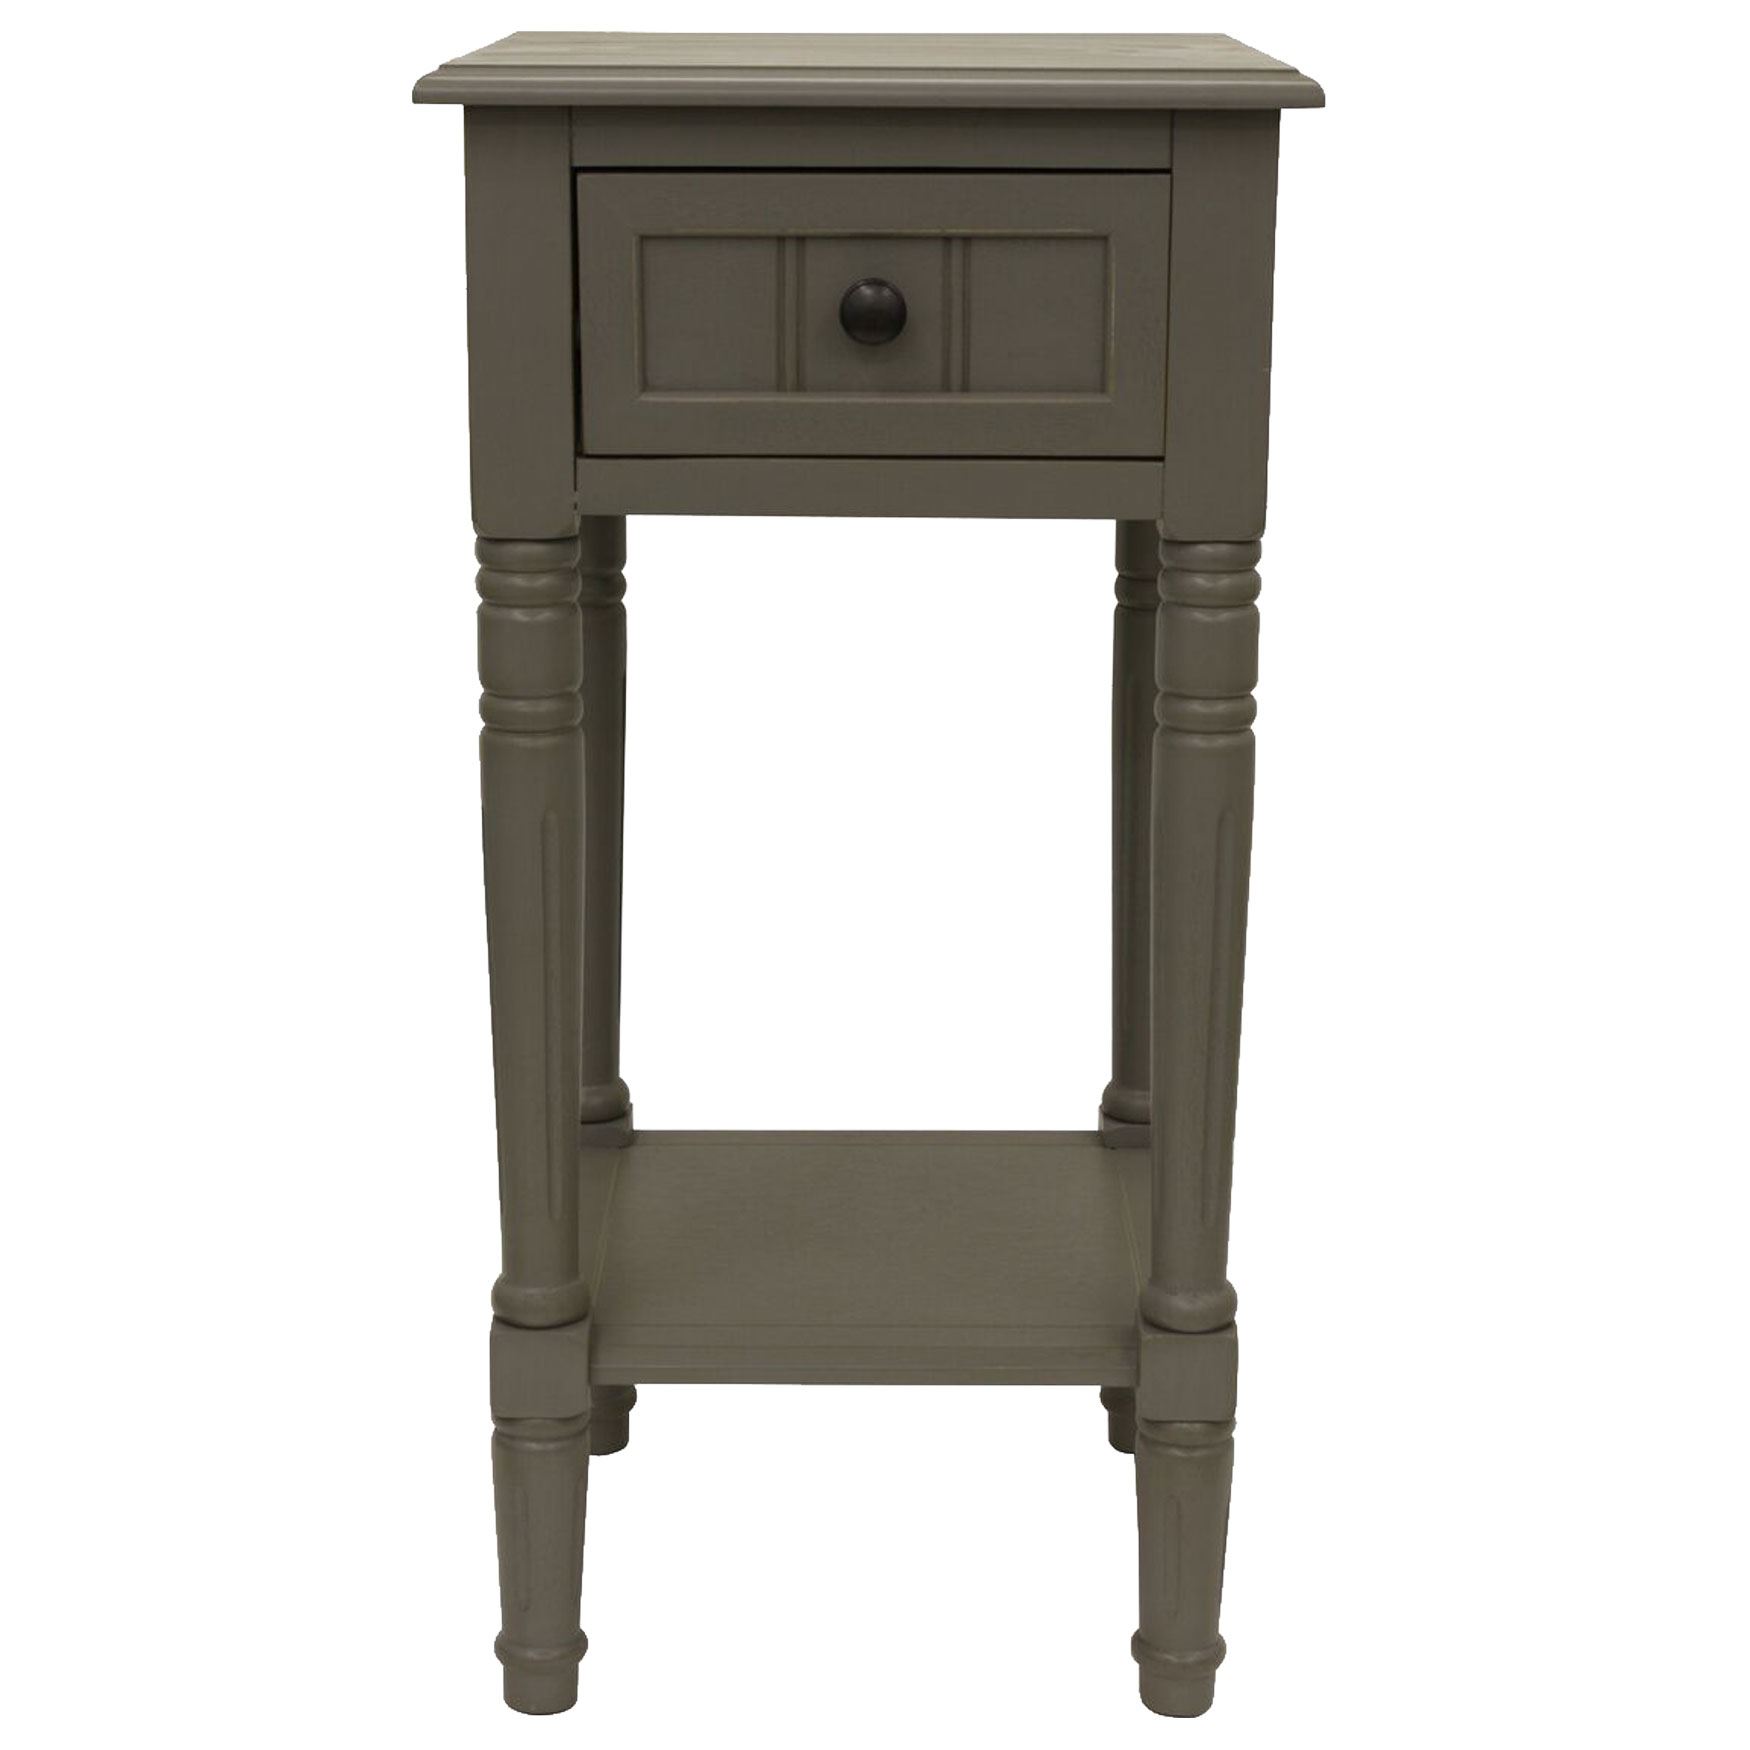 chic accent table plus size furniture fireplaces gray outdoor battery lamps bar height cocktail wedding reception decorations narrow hallway console cabinet kitchen bistro